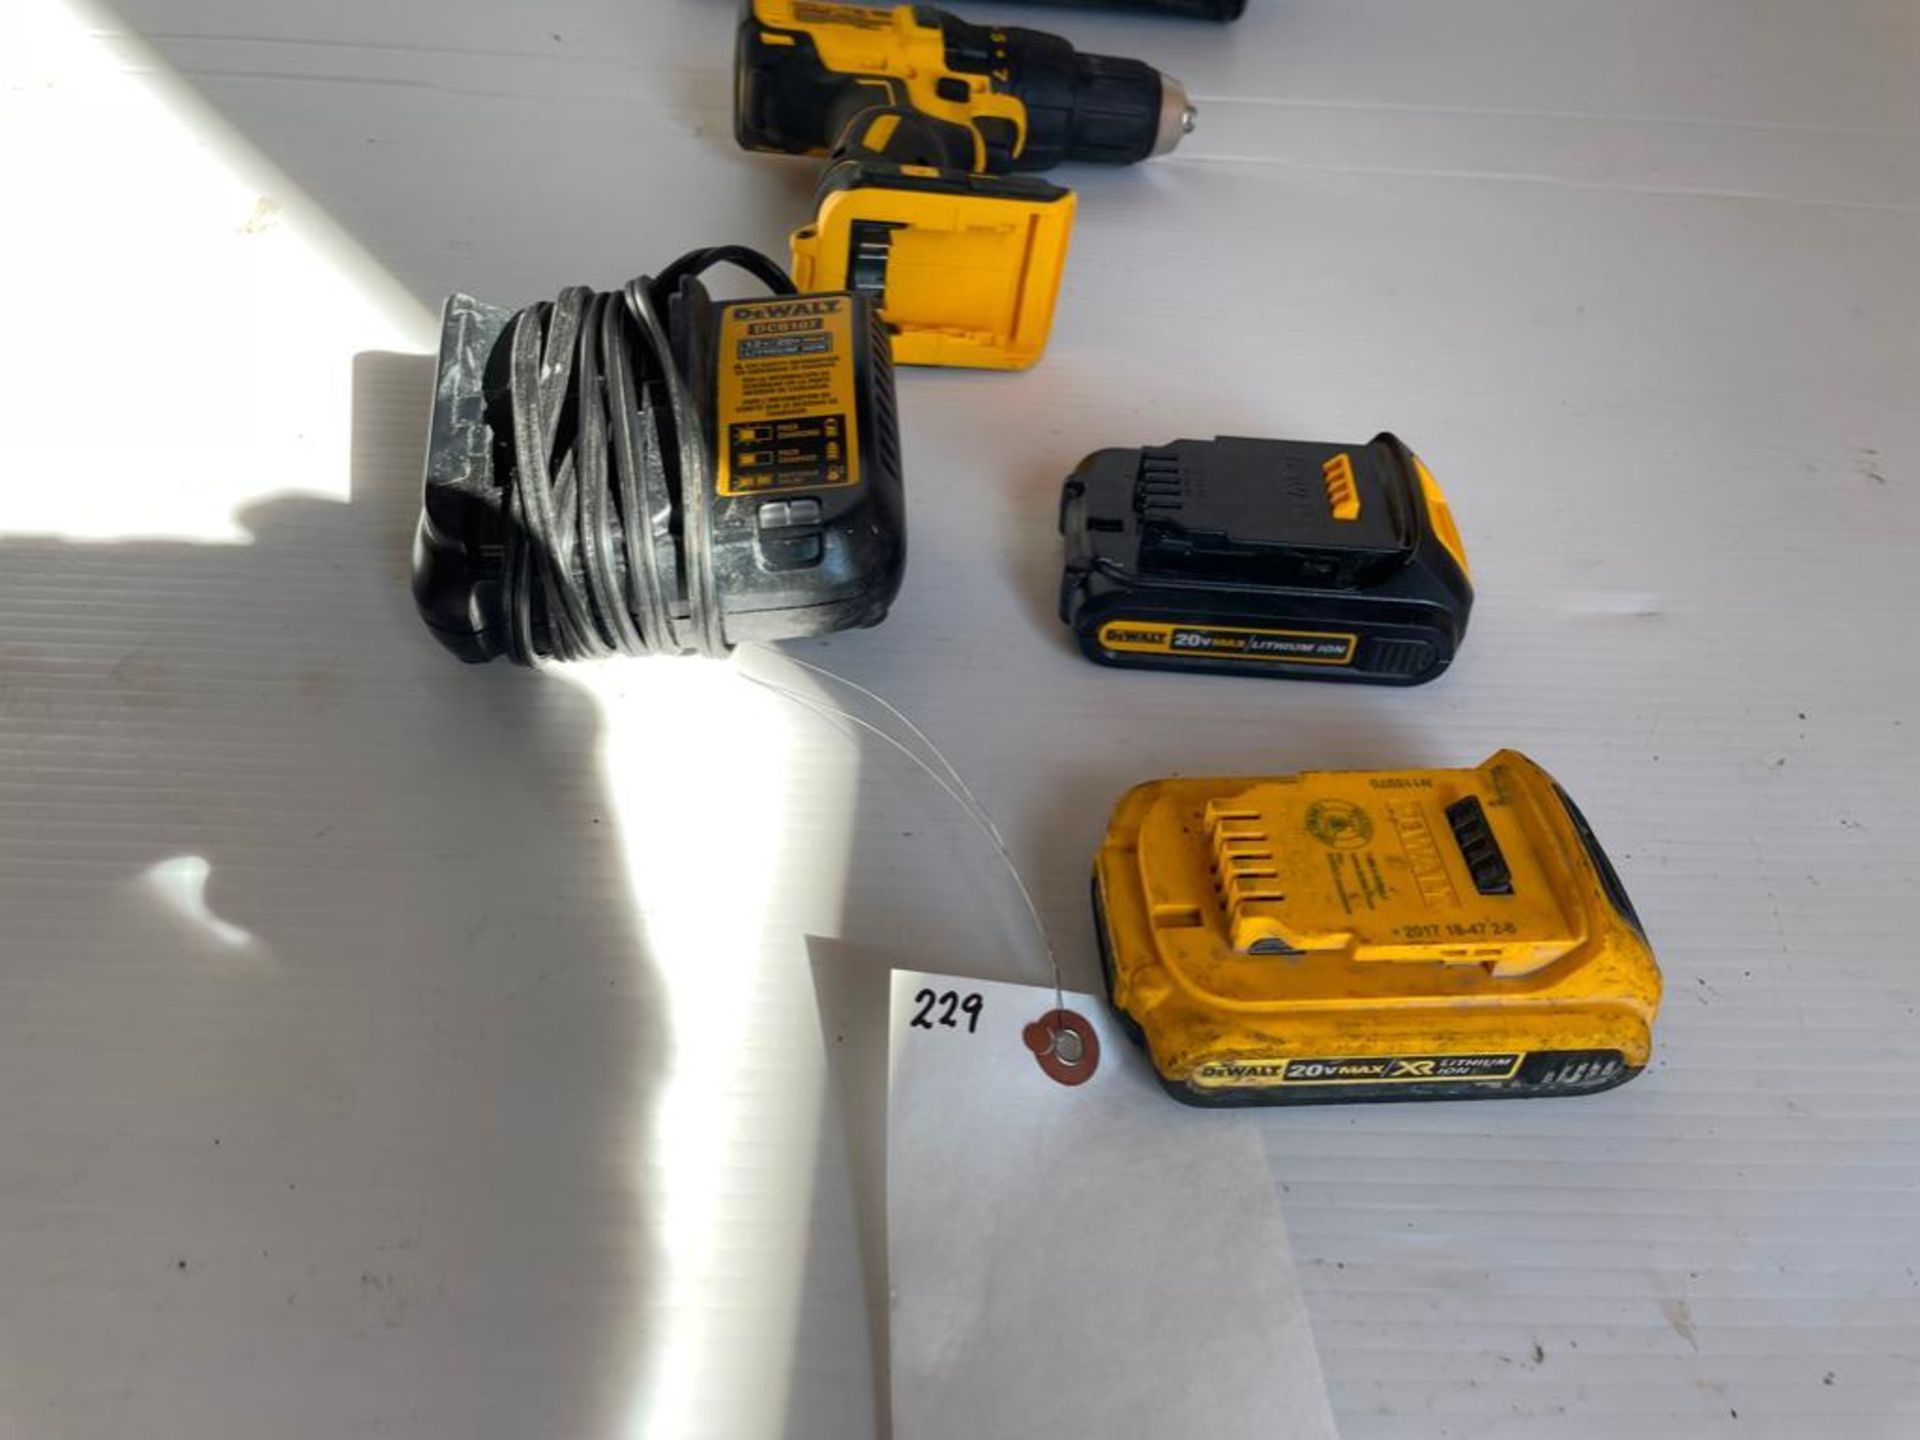 DeWalt DCD777 Cordless Drill Driver 1/2" with Battery, Charger & Case. Located in Hazelwood, MO - Image 7 of 8